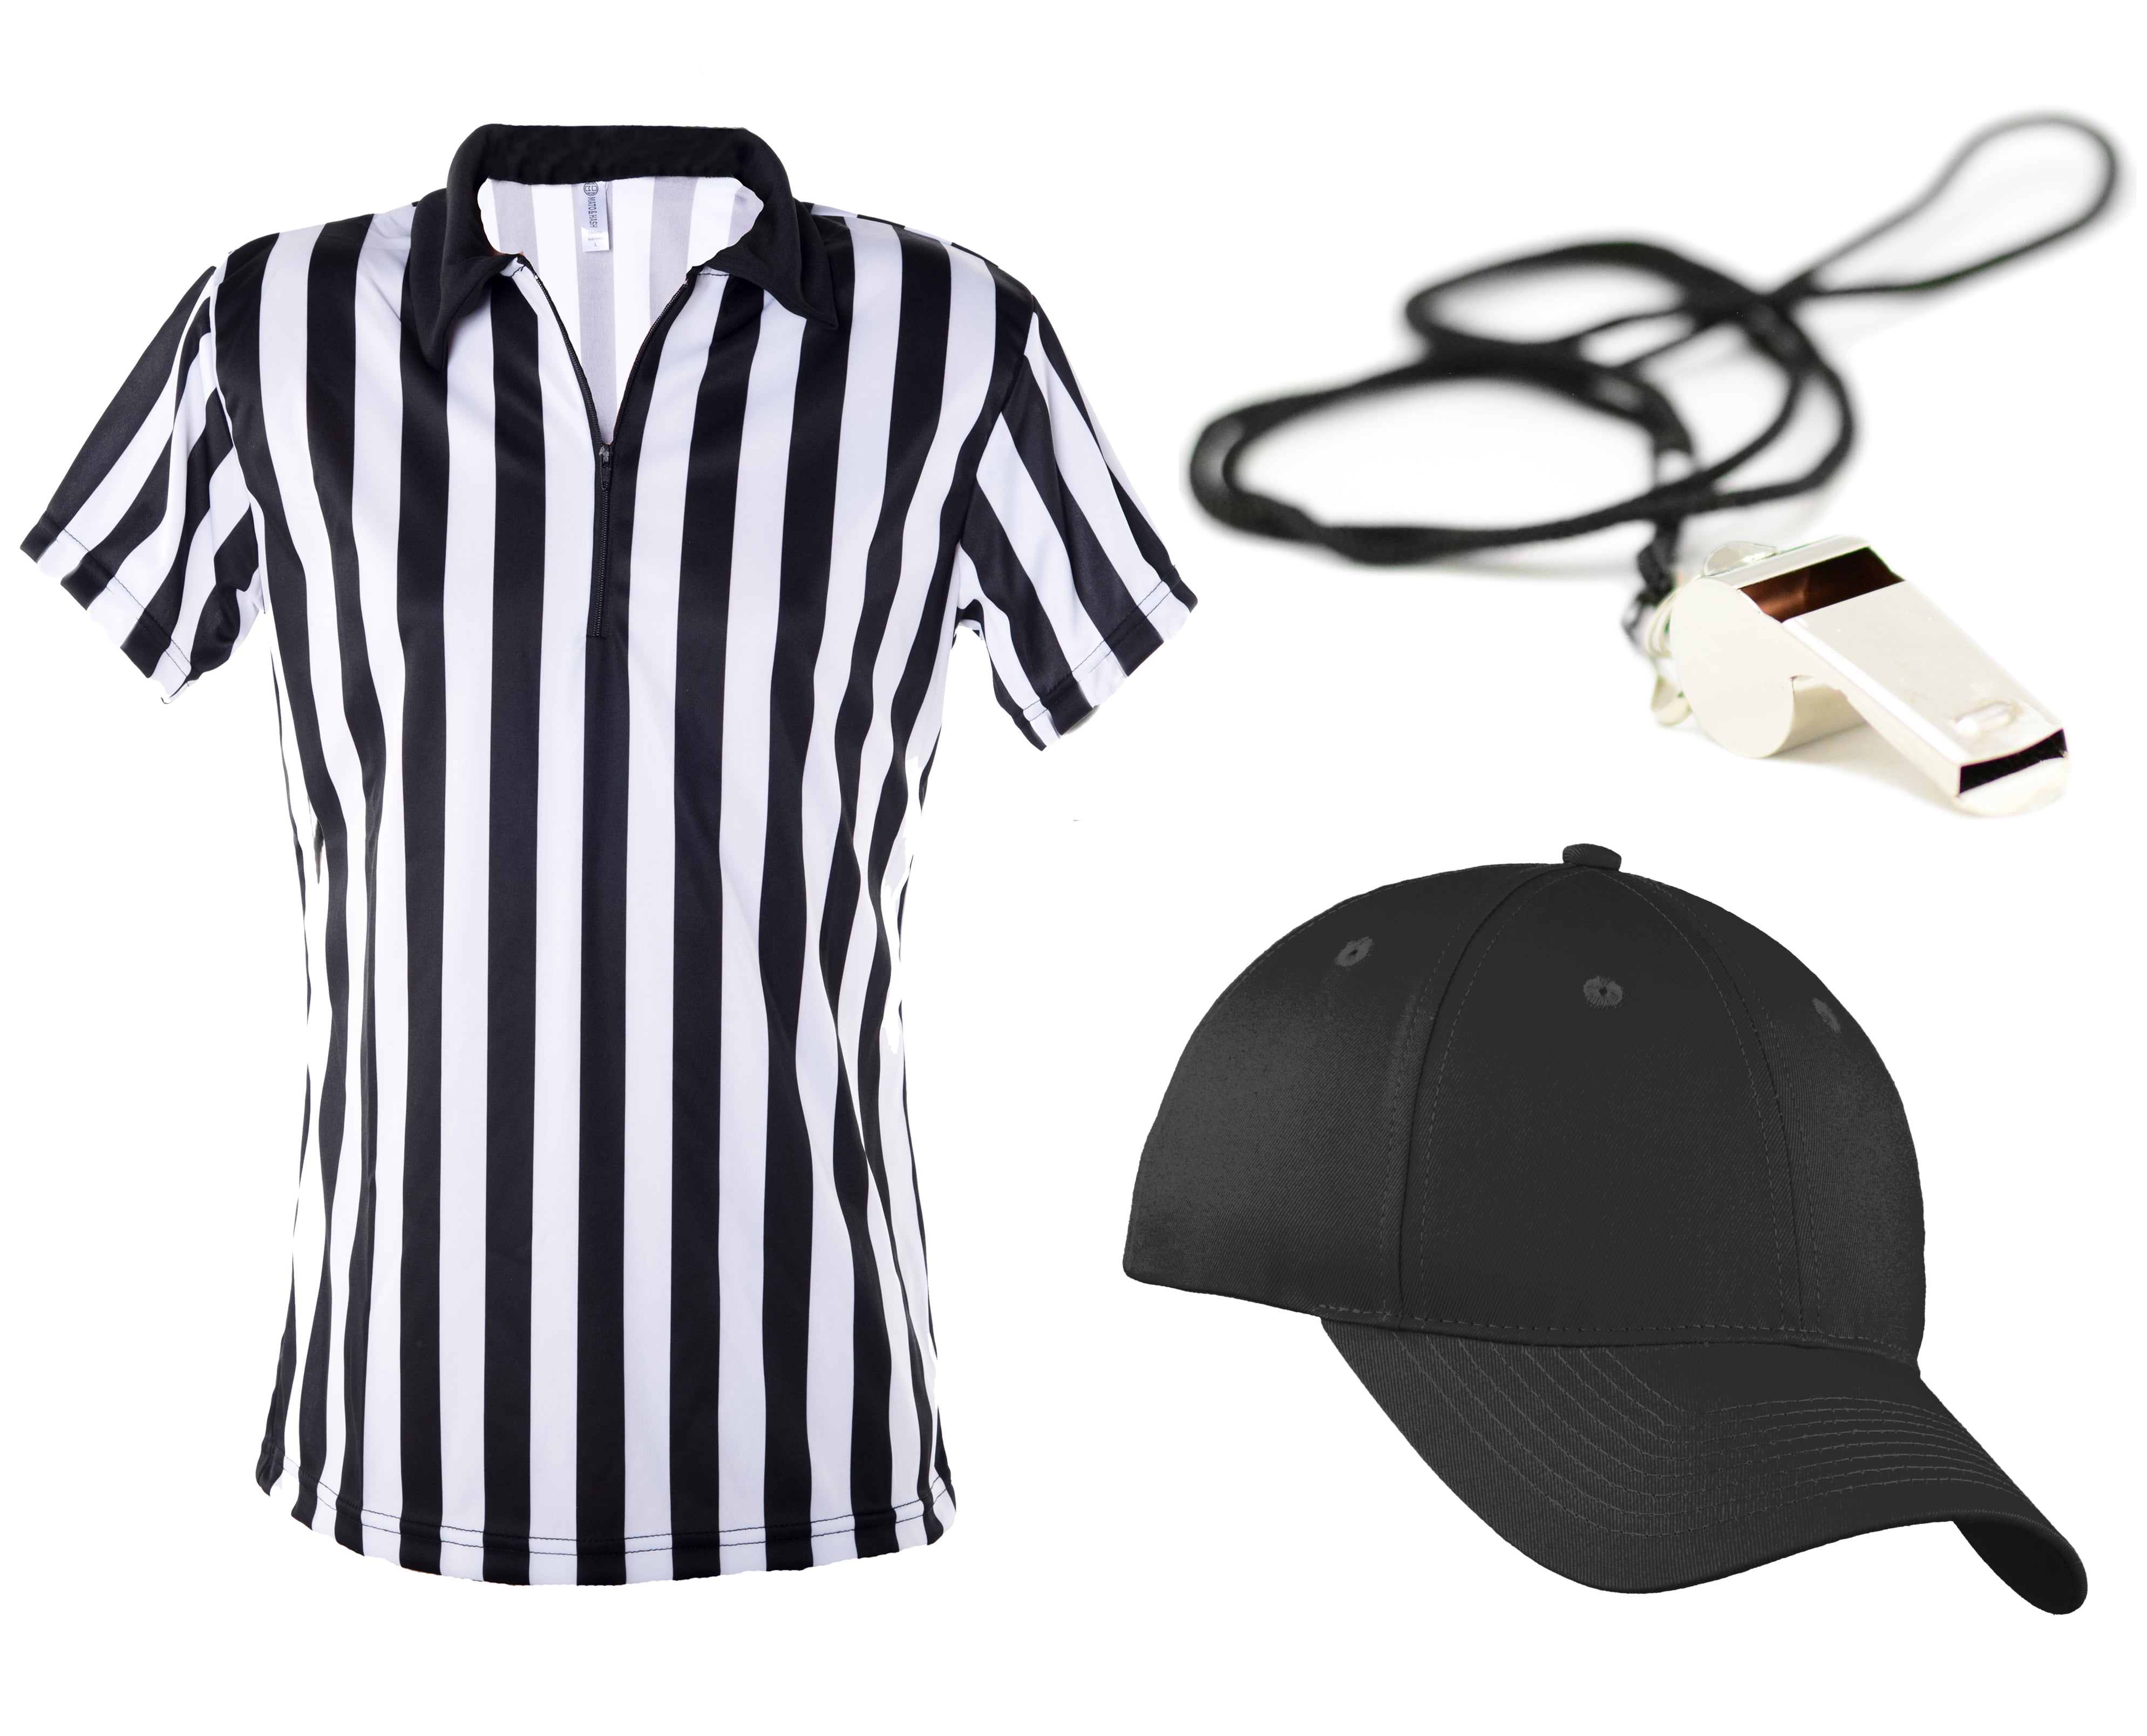 Mato & Hash Mens Referee Shirts/Umpire Jersey with Collar for Officiating and Costumes 